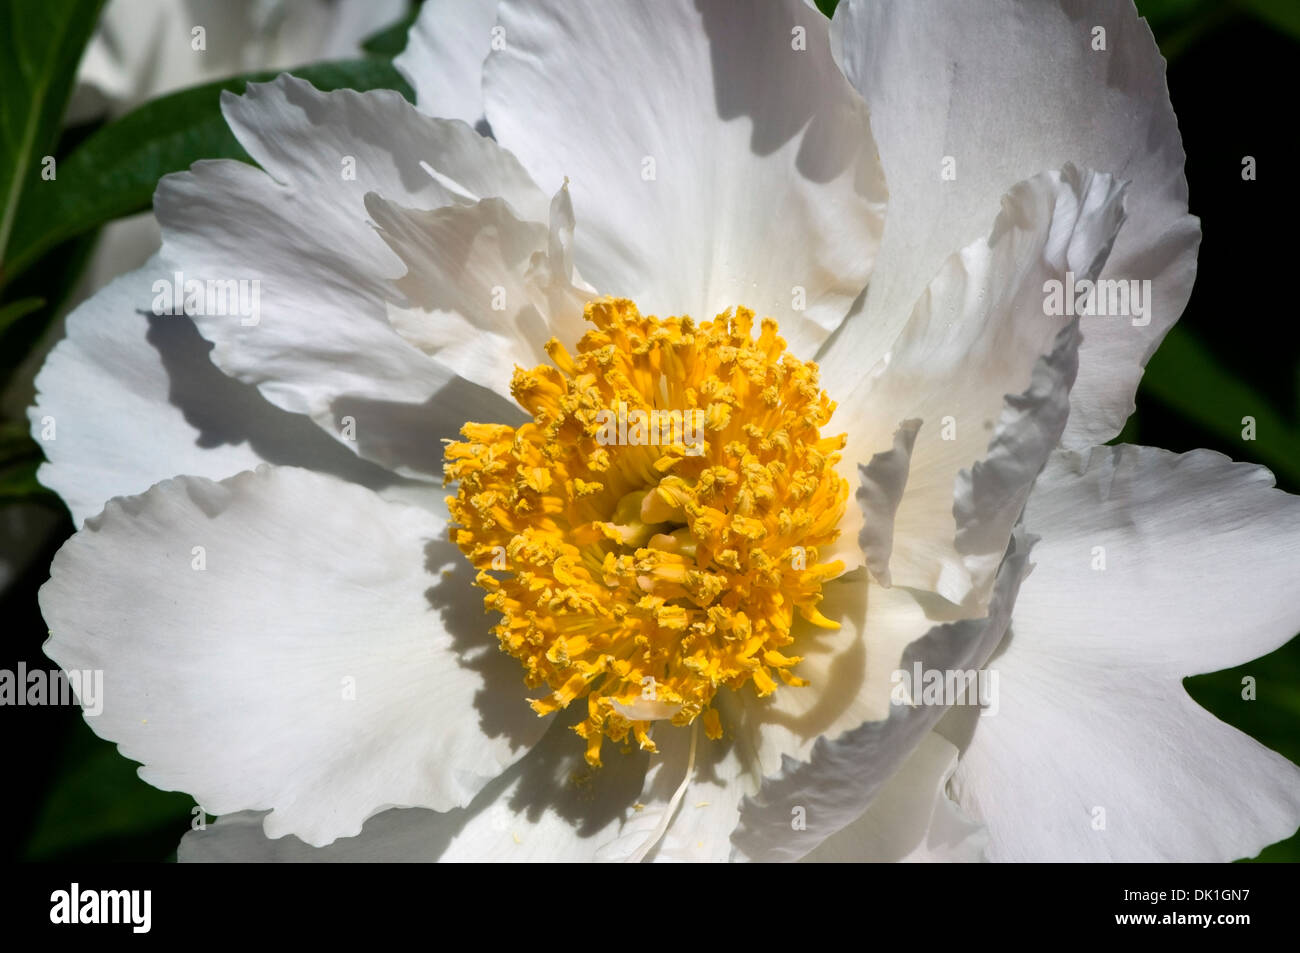 White peony flower with a golden yellow pollen filled center, macro close up. Stock Photo